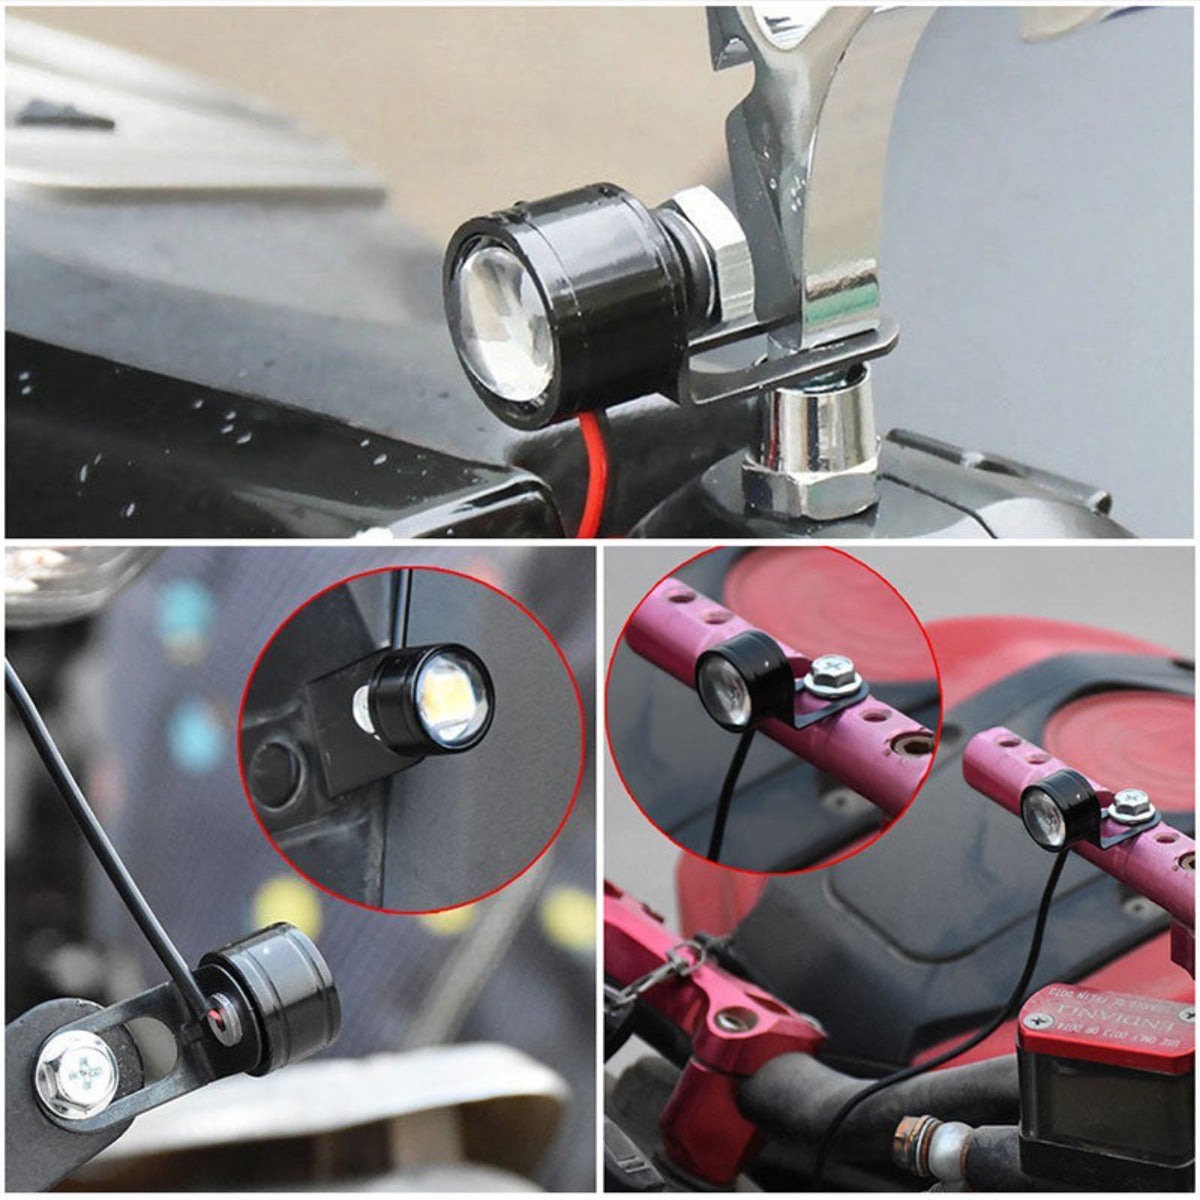 Motorcycle Strobe LED Driving Lights